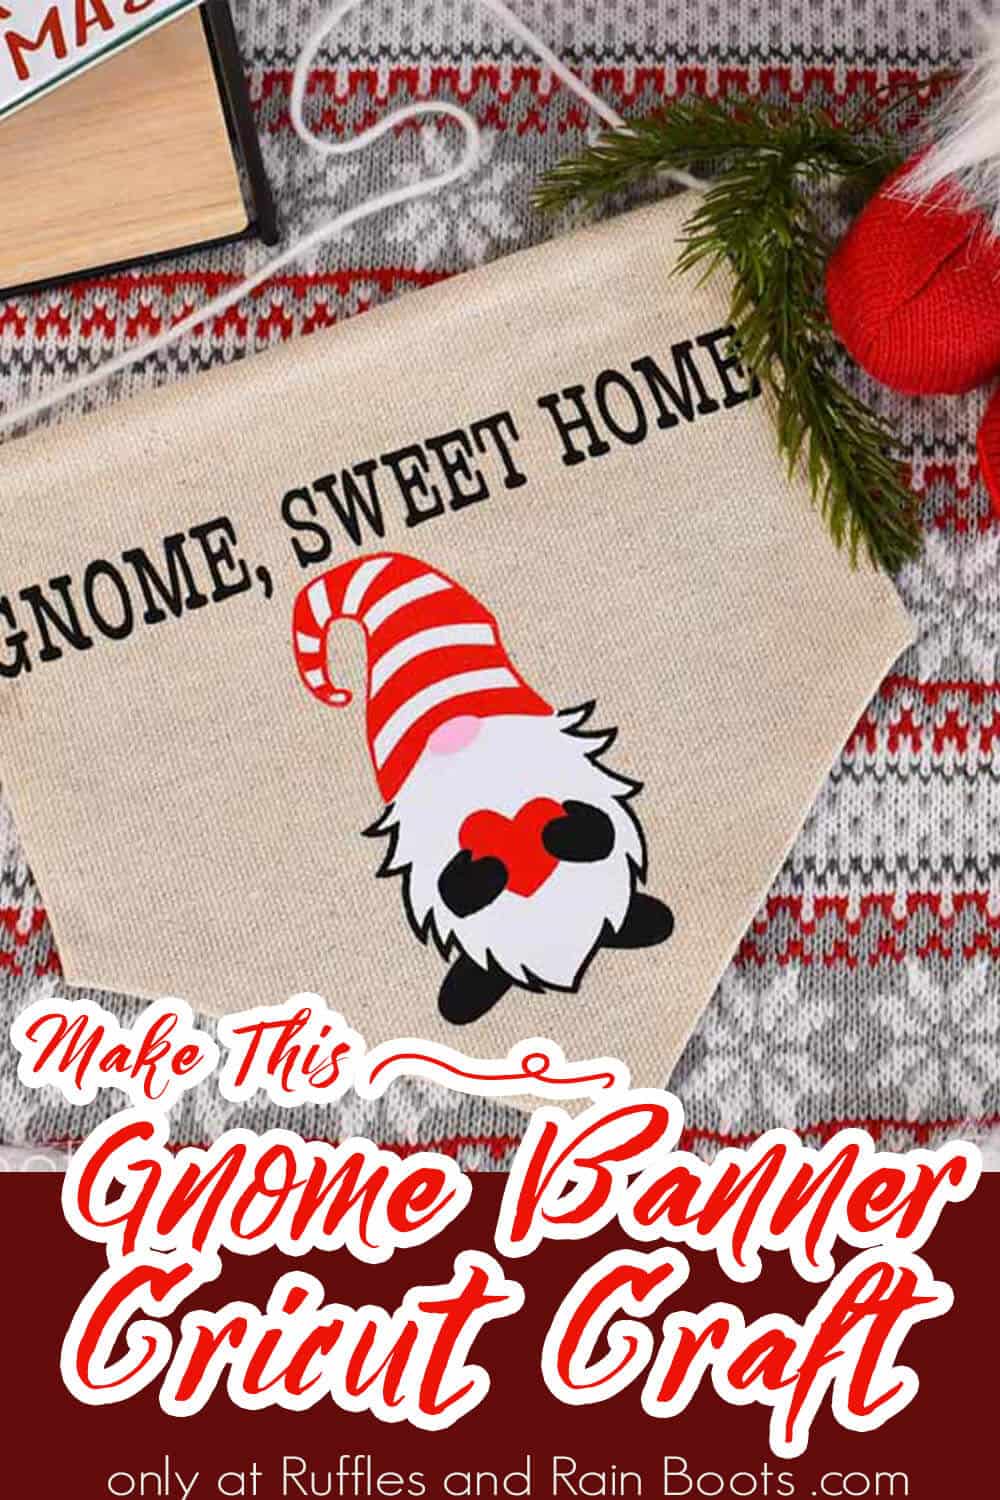 gnome craft holiday banner with text which reads make this gnome banner cricut craft